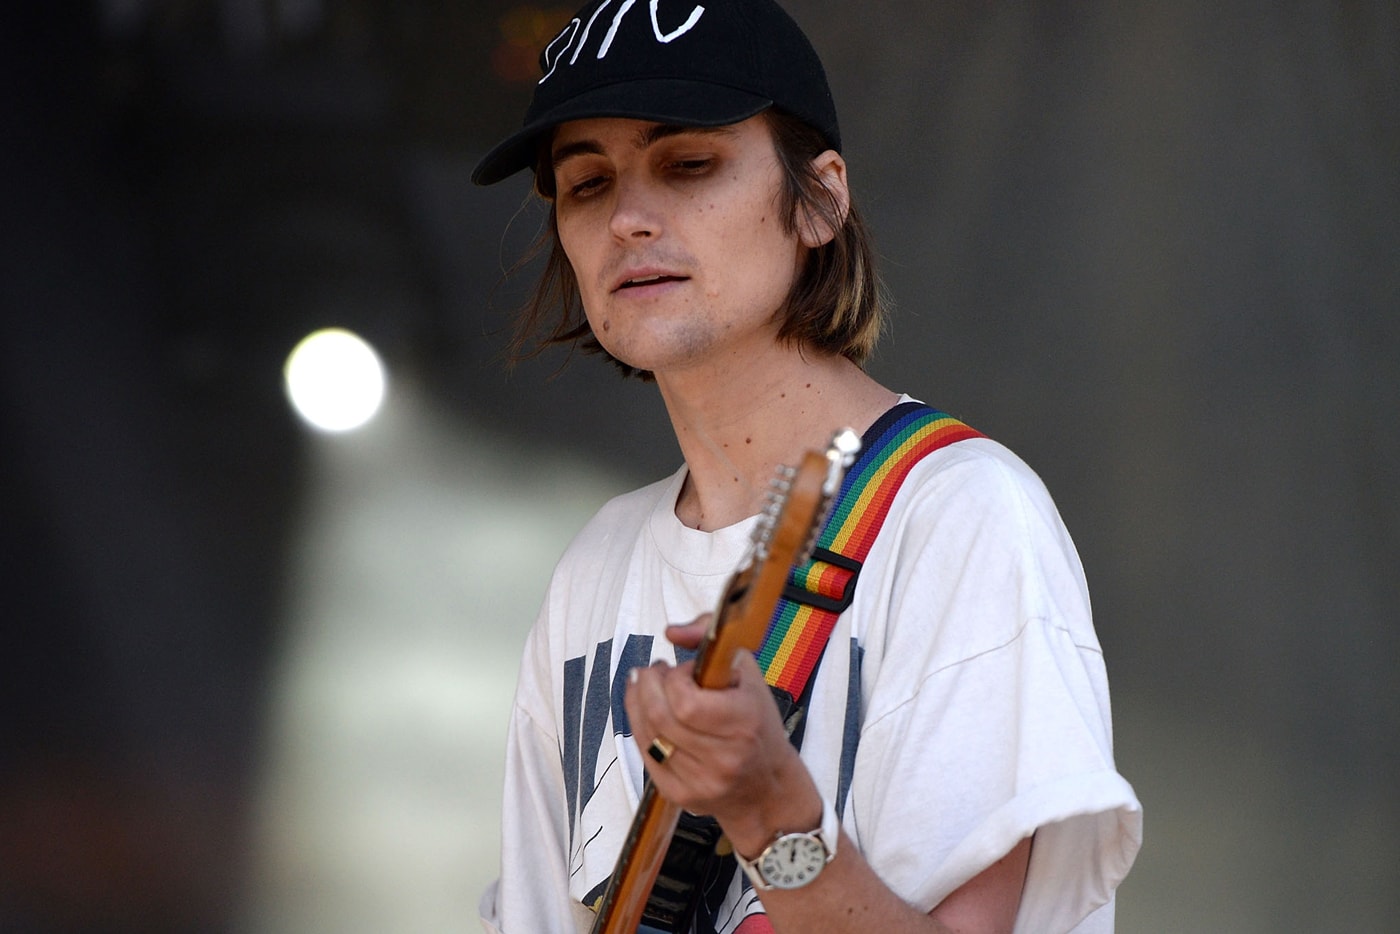 diiv-is-the-is-are